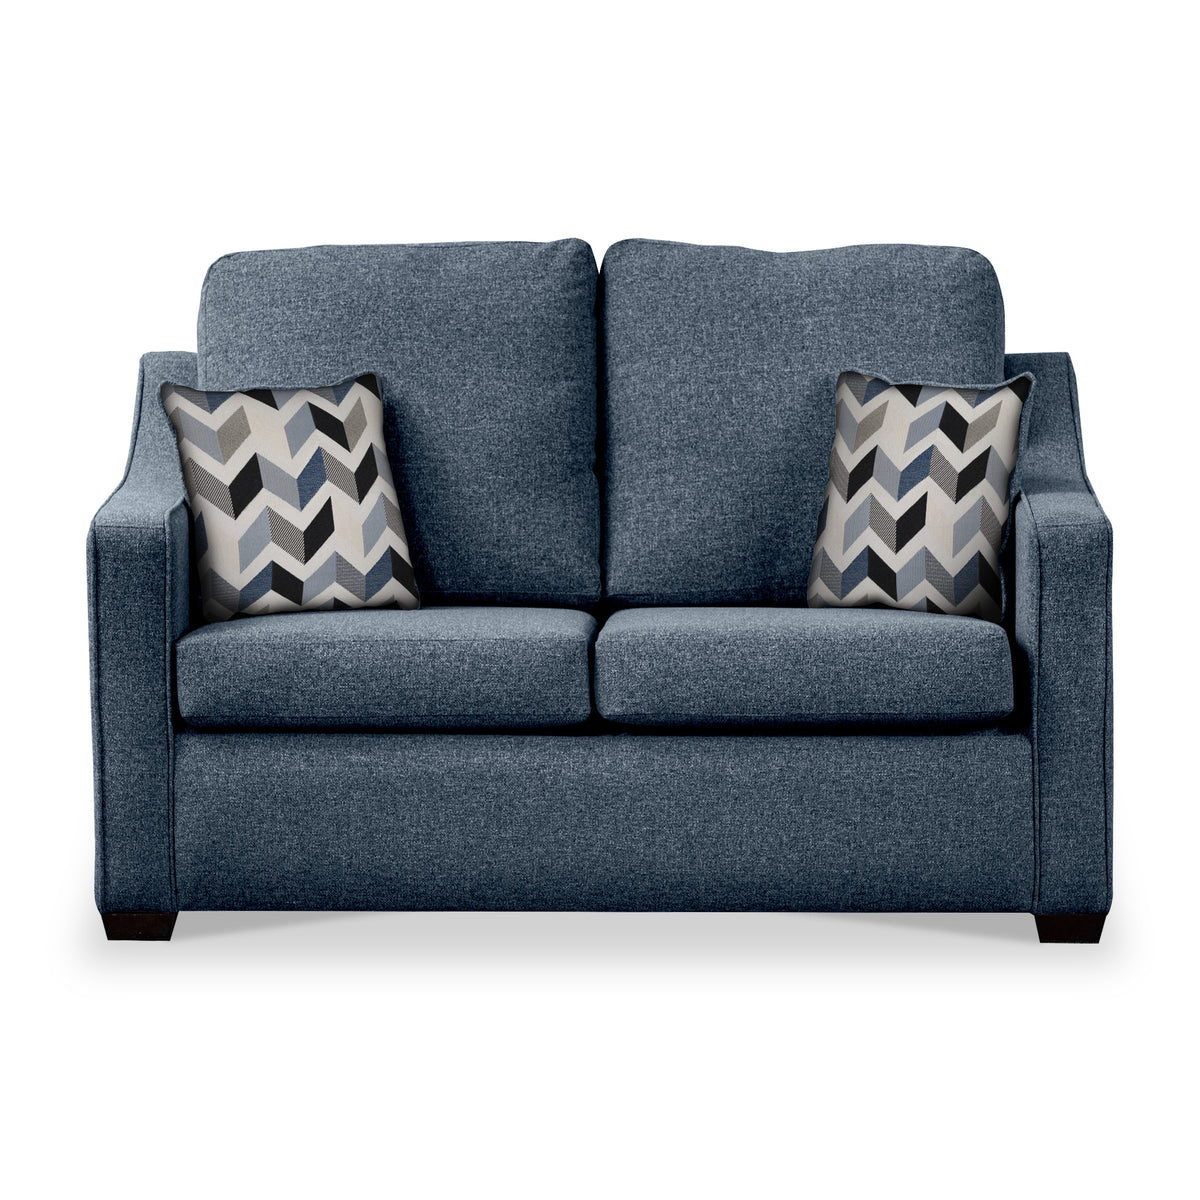 Fenton Midnight Soft Weave 2 Seater Sofabed with Denim Scatter Cushions from Roseland Furniture